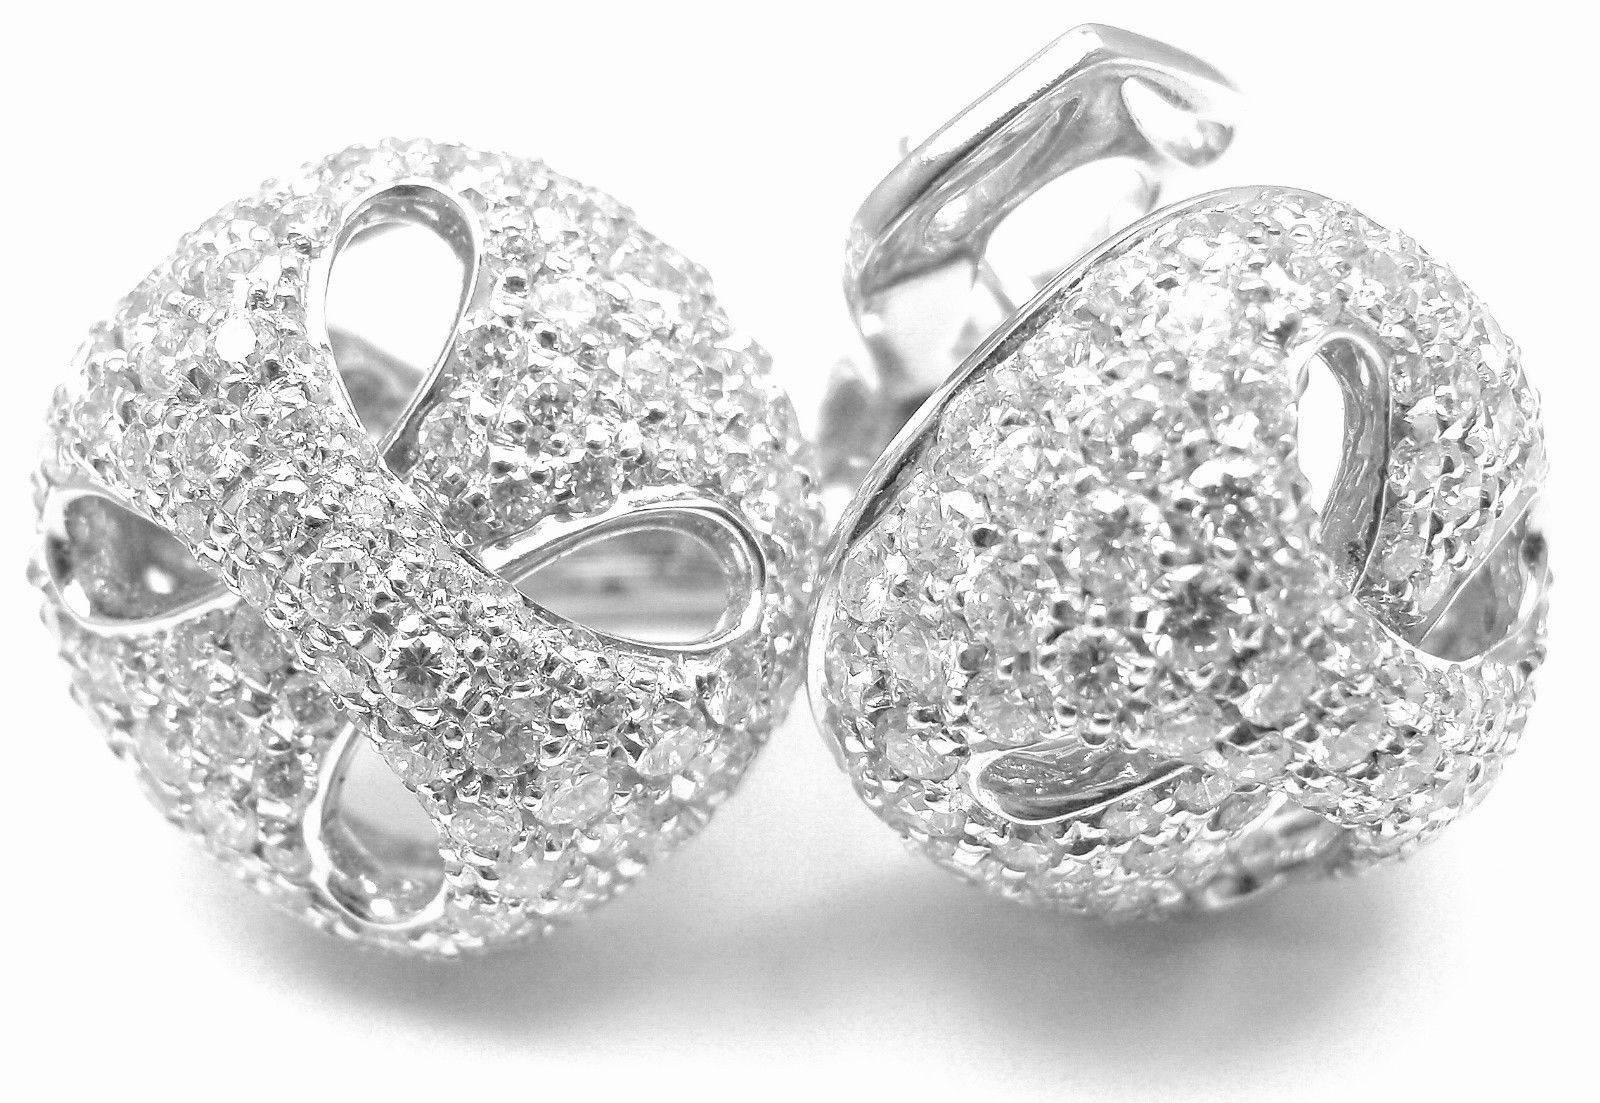 18k White Gold 3.03ct Diamond Earrings by Damiani.
With Round Brilliant Cut Diamonds VS1 Clarity G color total weight approx. 3.03ct
These earrings come with Box, Certificate and Tag.

Details:
Measurements: 18mm x 15mm
Weight: 9.7